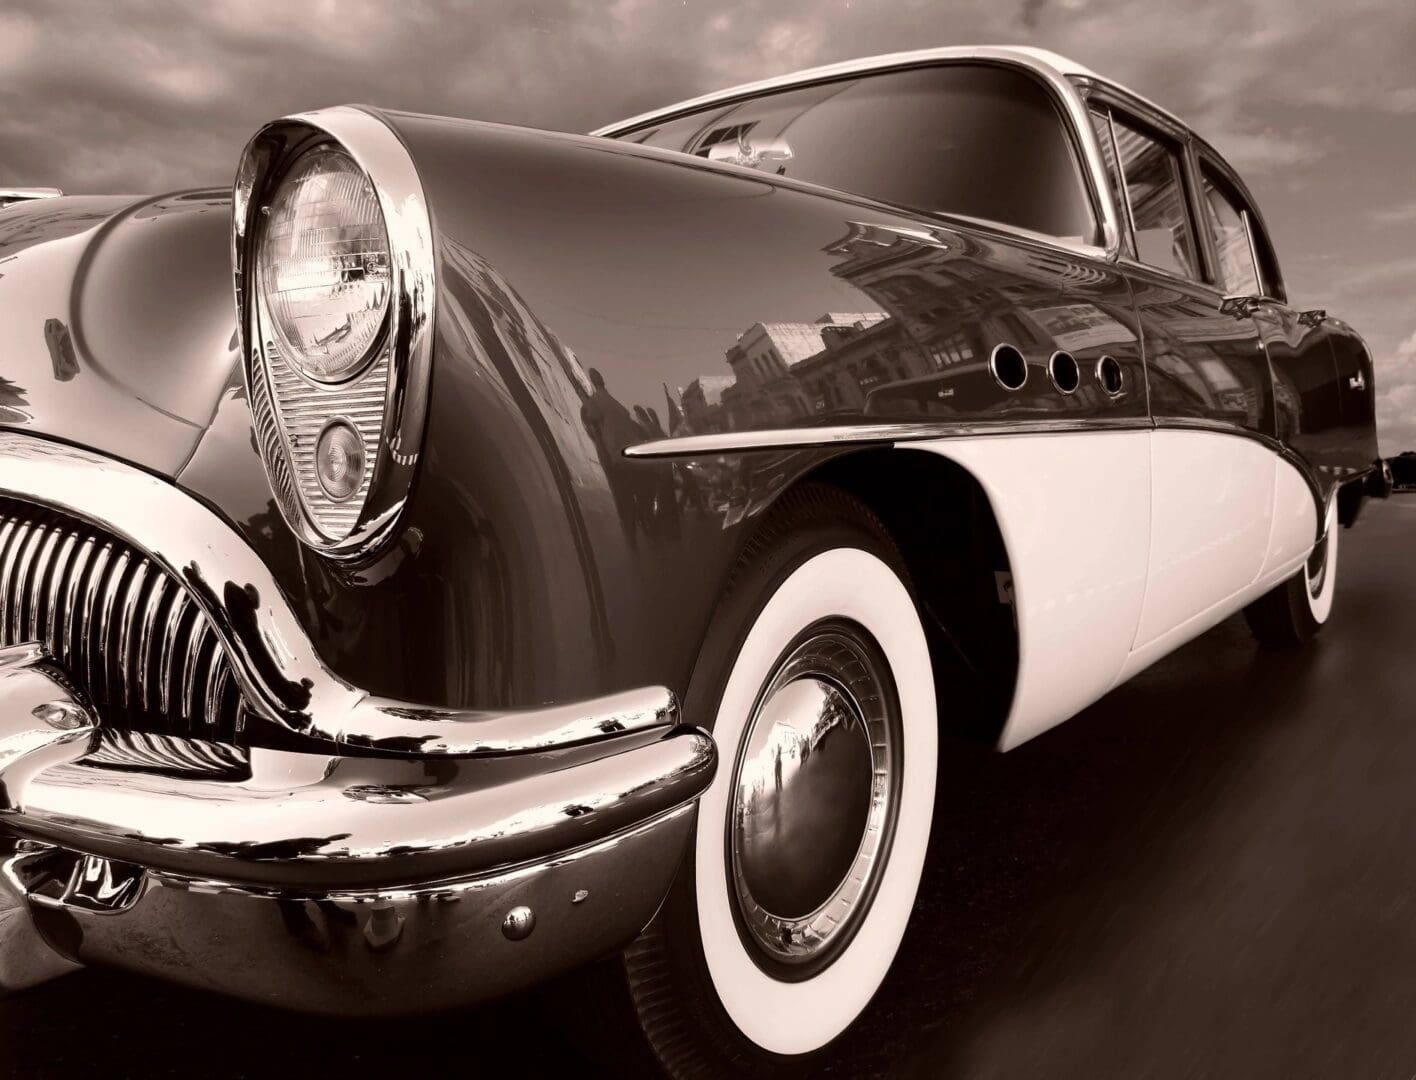 A black and white photo of an old car.